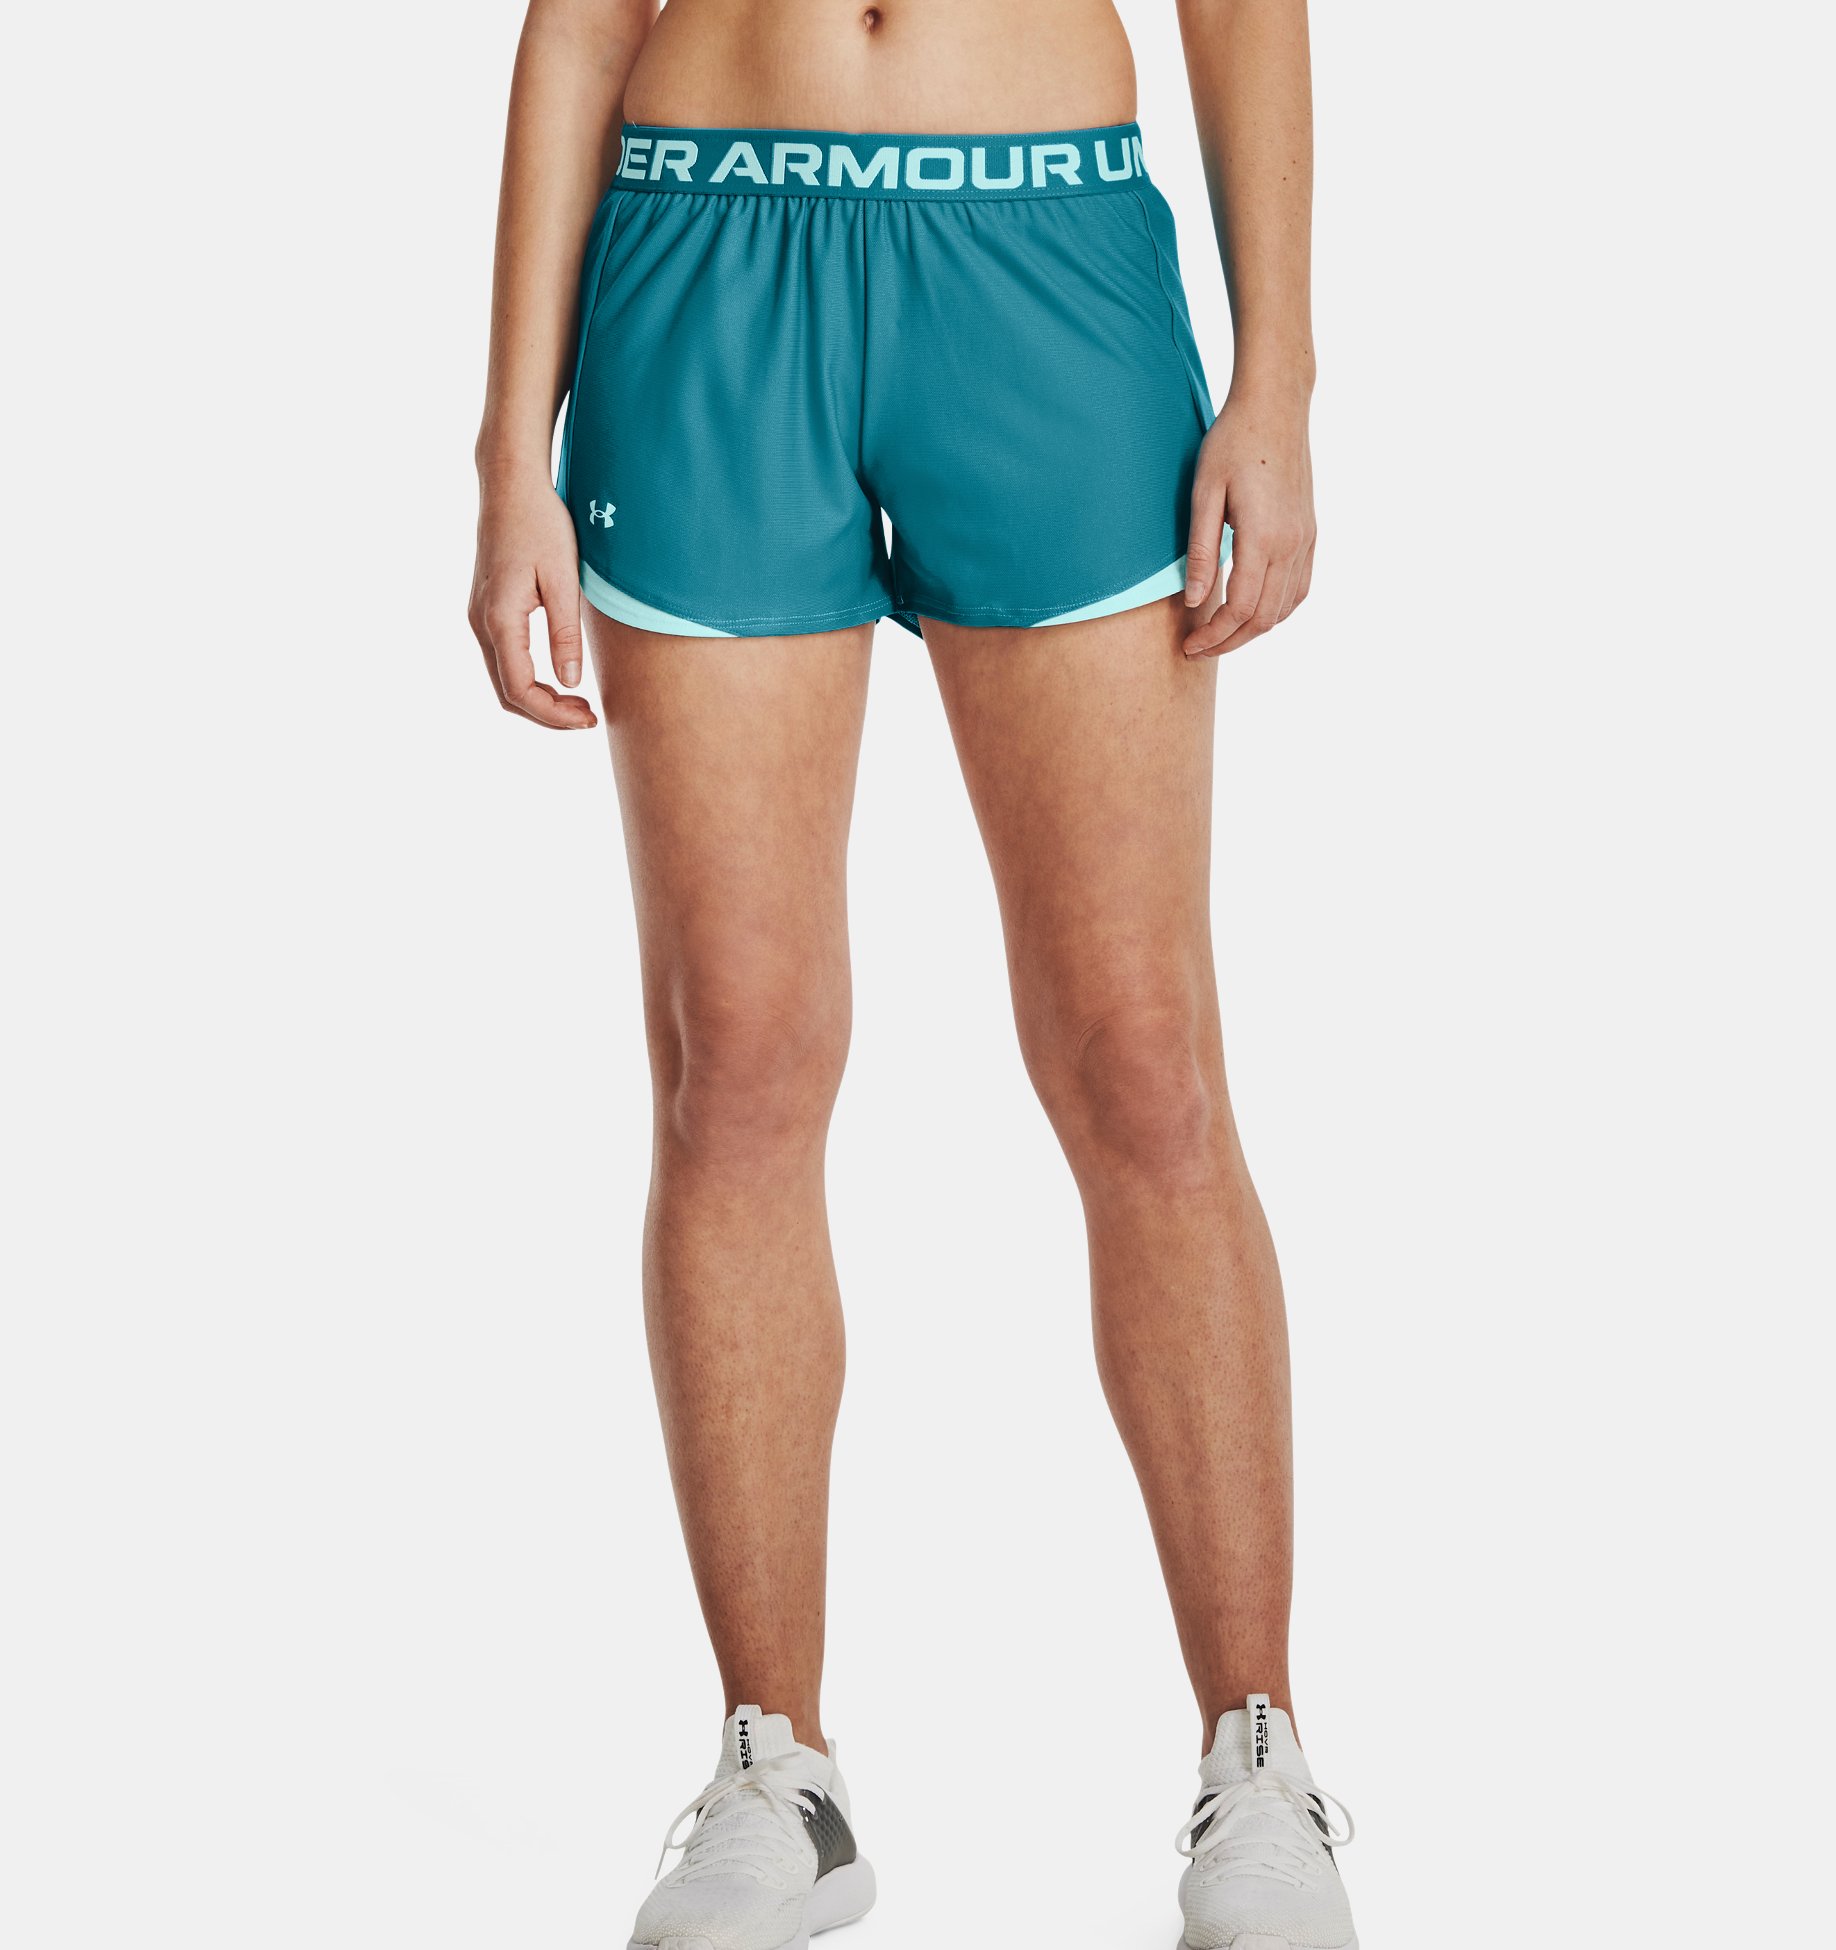 Women’s UA Play Up 2.0 Shorts in Crest Blue / Breeze for $10.97